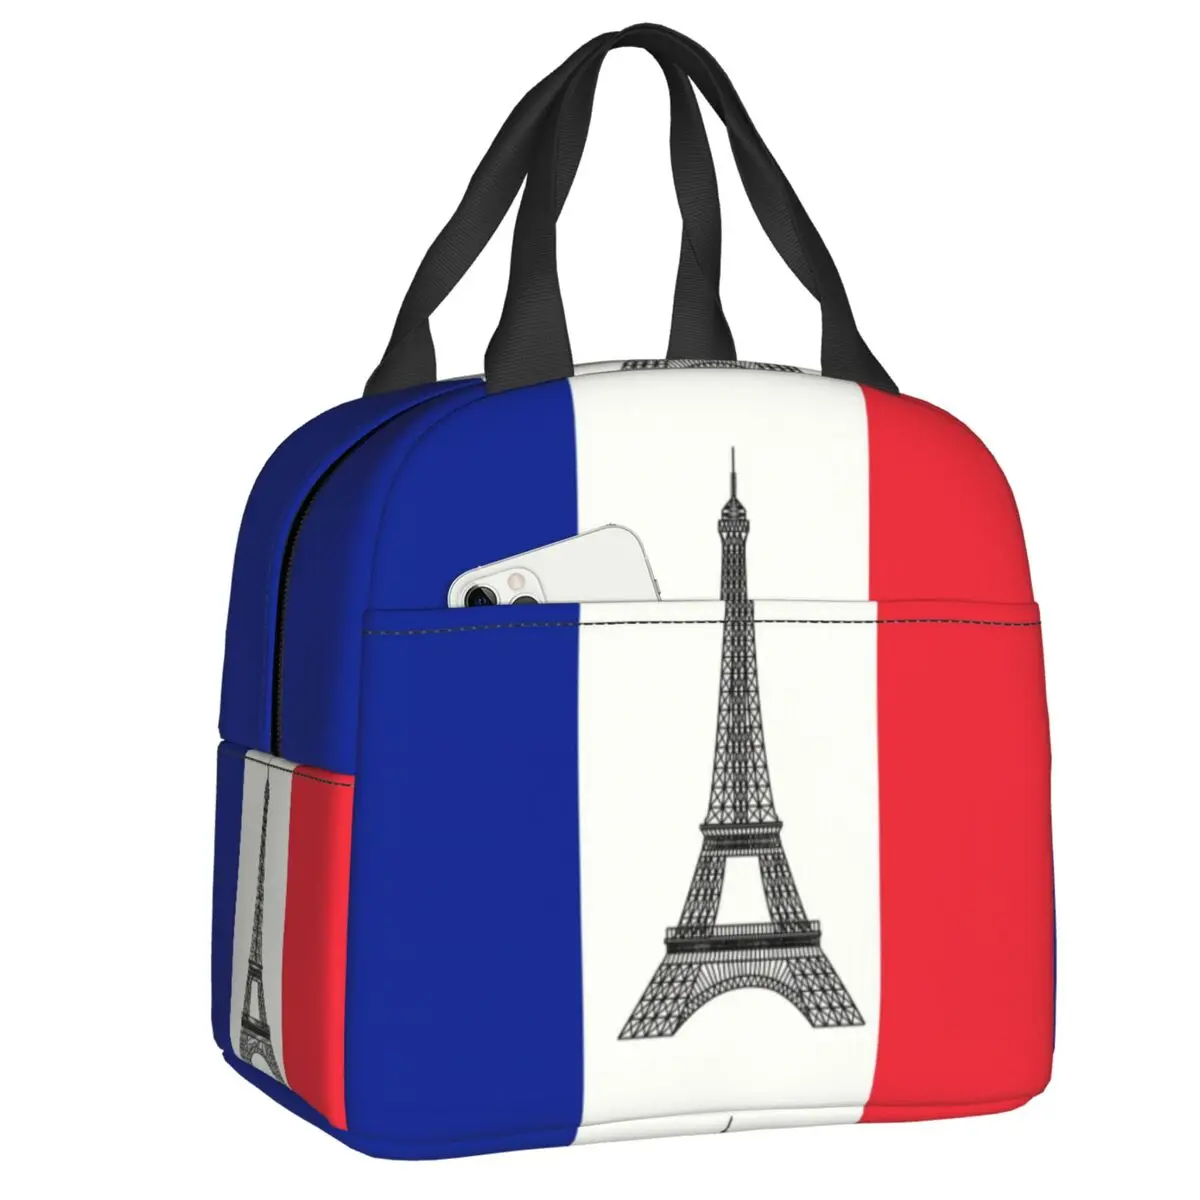 

Flag Of France Insulated Lunch Tote Bag for Women French La Tour Eiffel Portable Cooler Thermal Bento Box Kids School Children